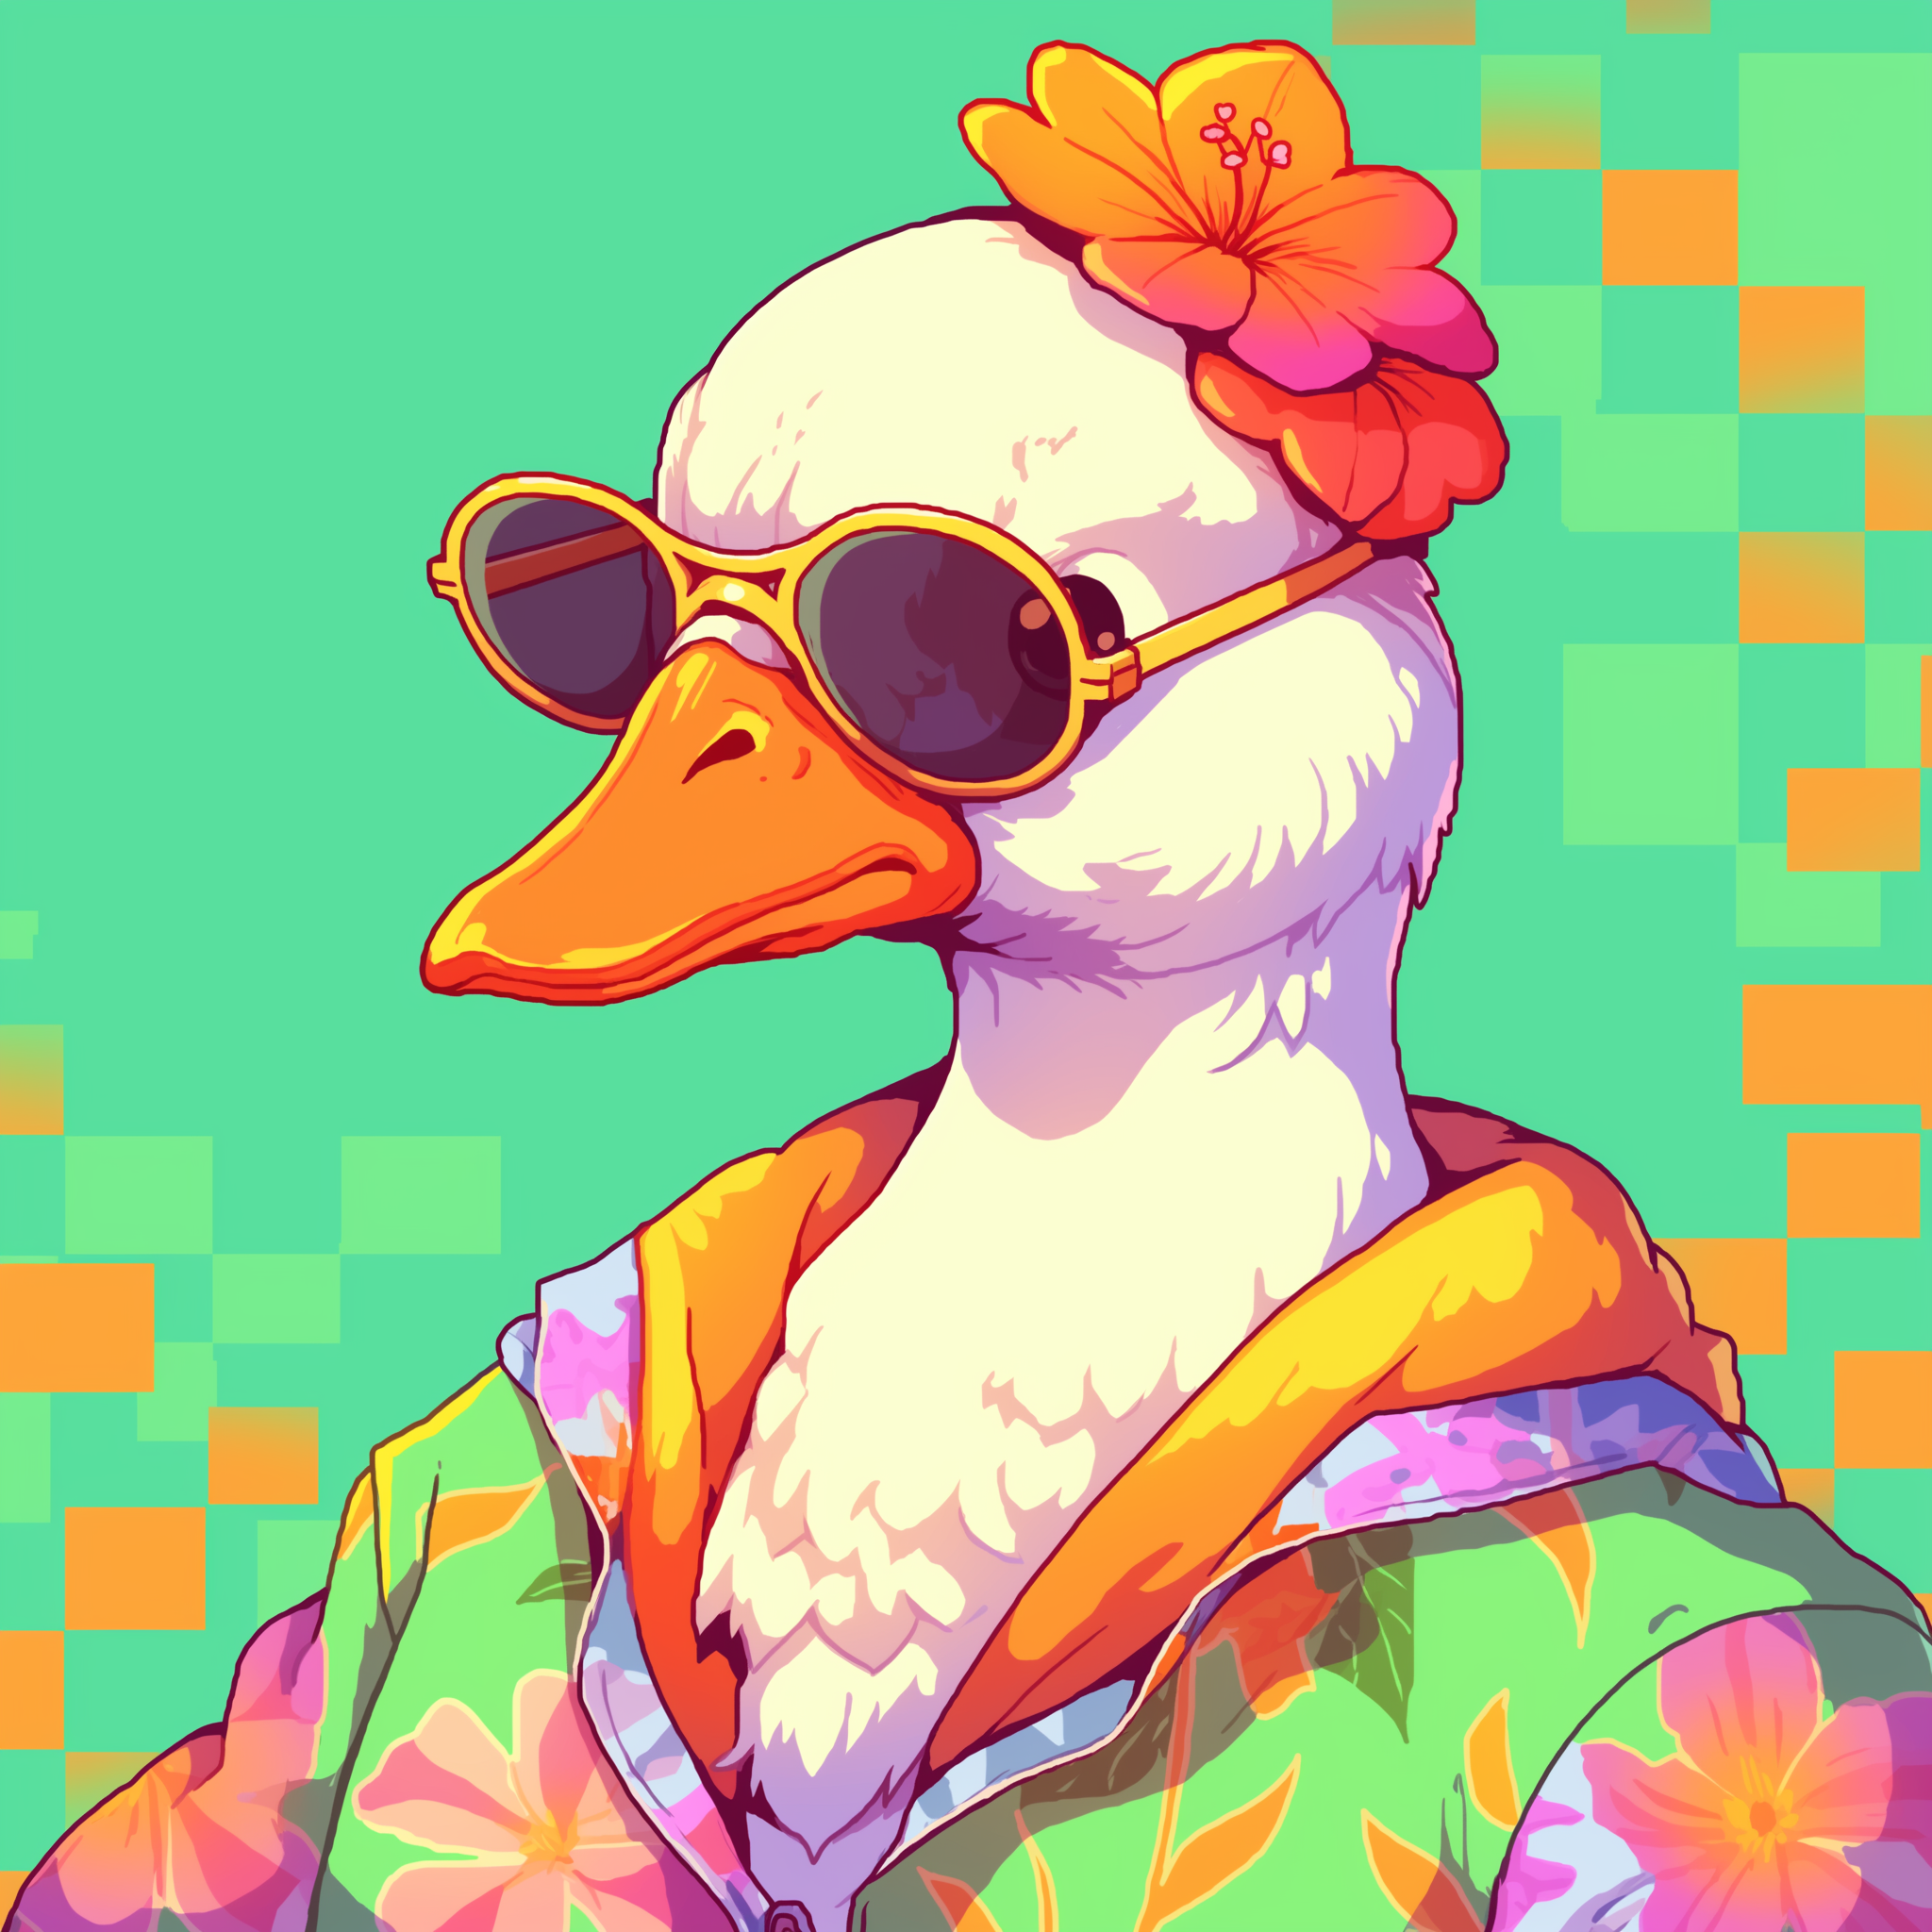 Cartoon goose with sunglasses and a floral shirt, suitable as a quirky avatar or profile picture, against a turquoise and orange pixelated background.